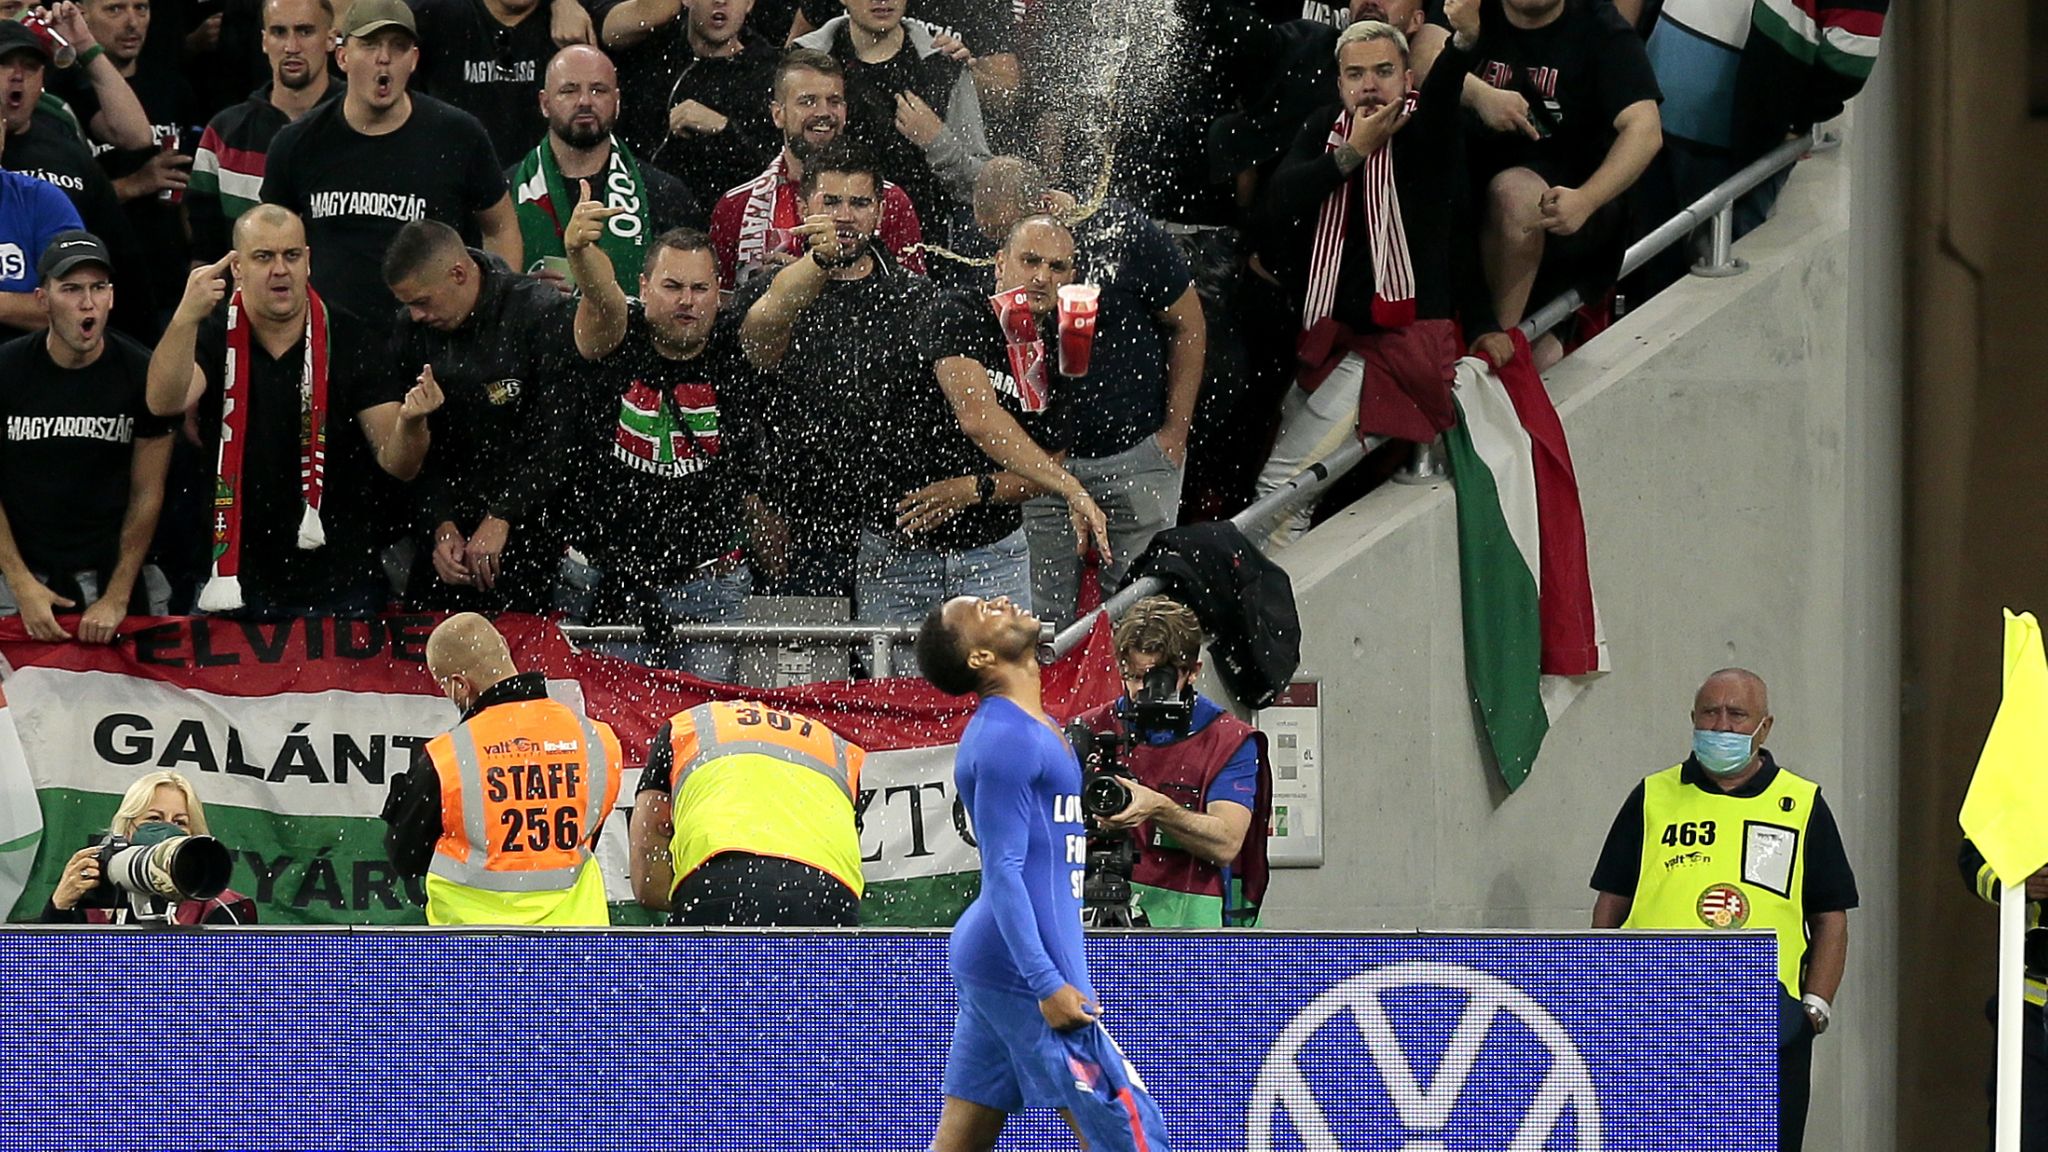 FIFA sanctions Hungary over ‘racist behavior’ in soccer match